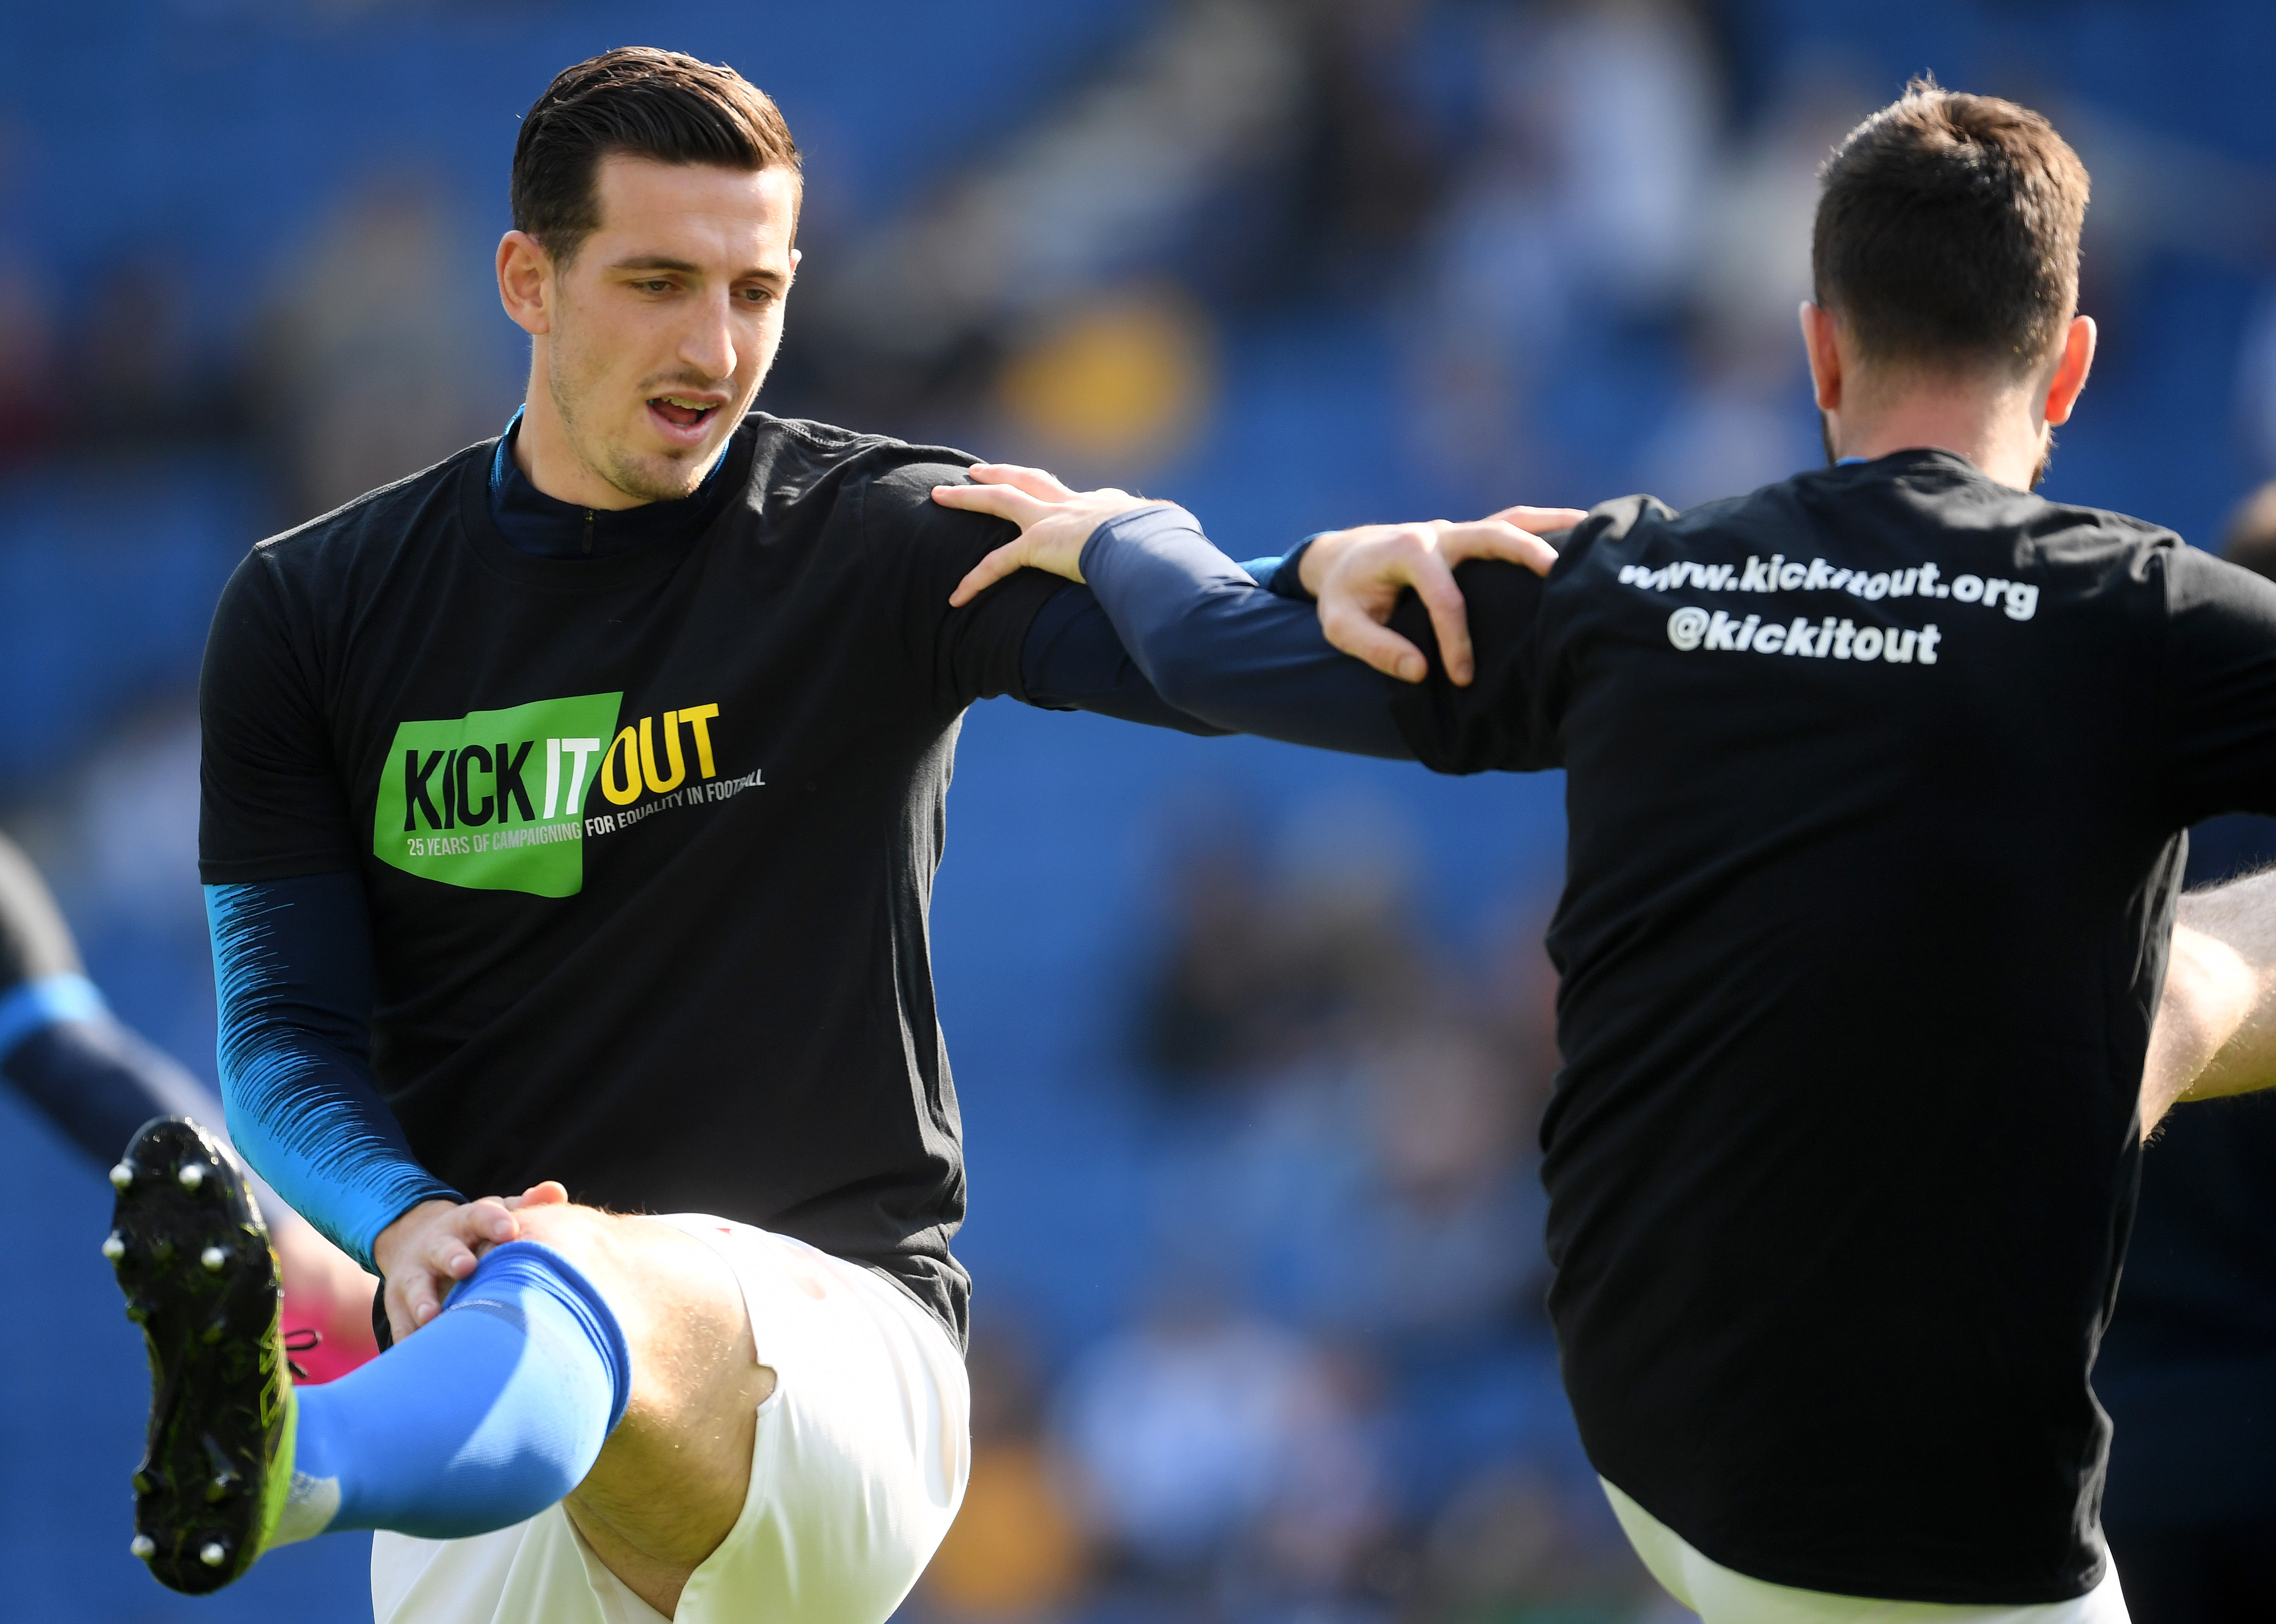 BRIGHTON, ENGLAND - MARCH 30: Lewis Dunk of Brighton and Hove Albion warms up prior to the Premier League match between Brighton & Hove Albion and Southampton FC at American Express Community Stadium on March 30, 2019 in Brighton, United Kingdom. (Photo by Mike Hewitt/Getty Images)